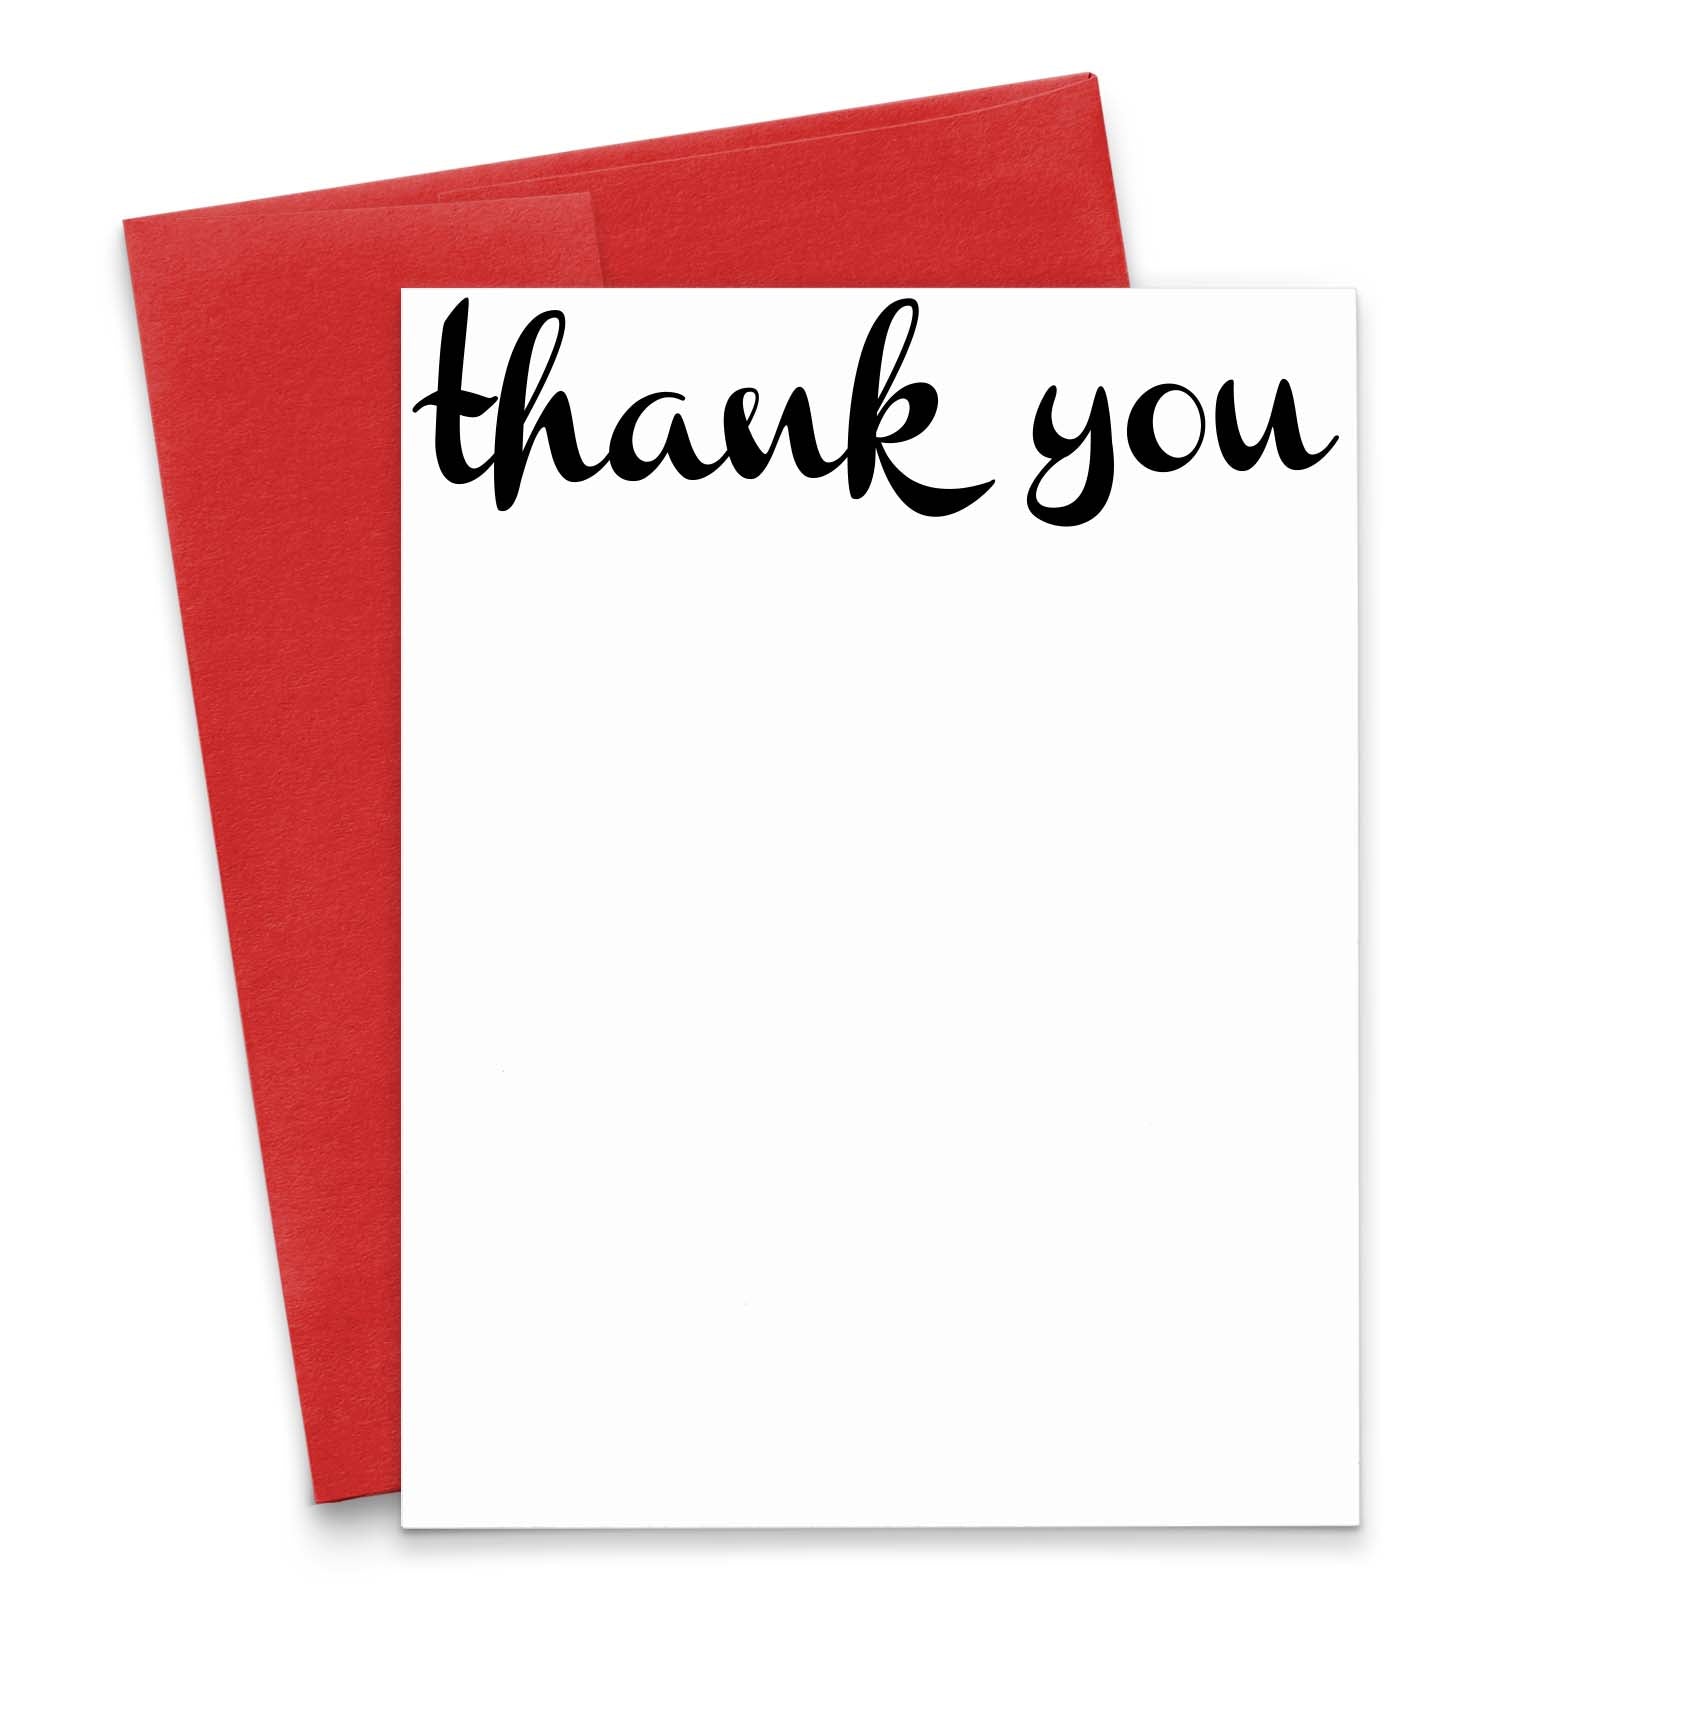 Create Thank You Cards